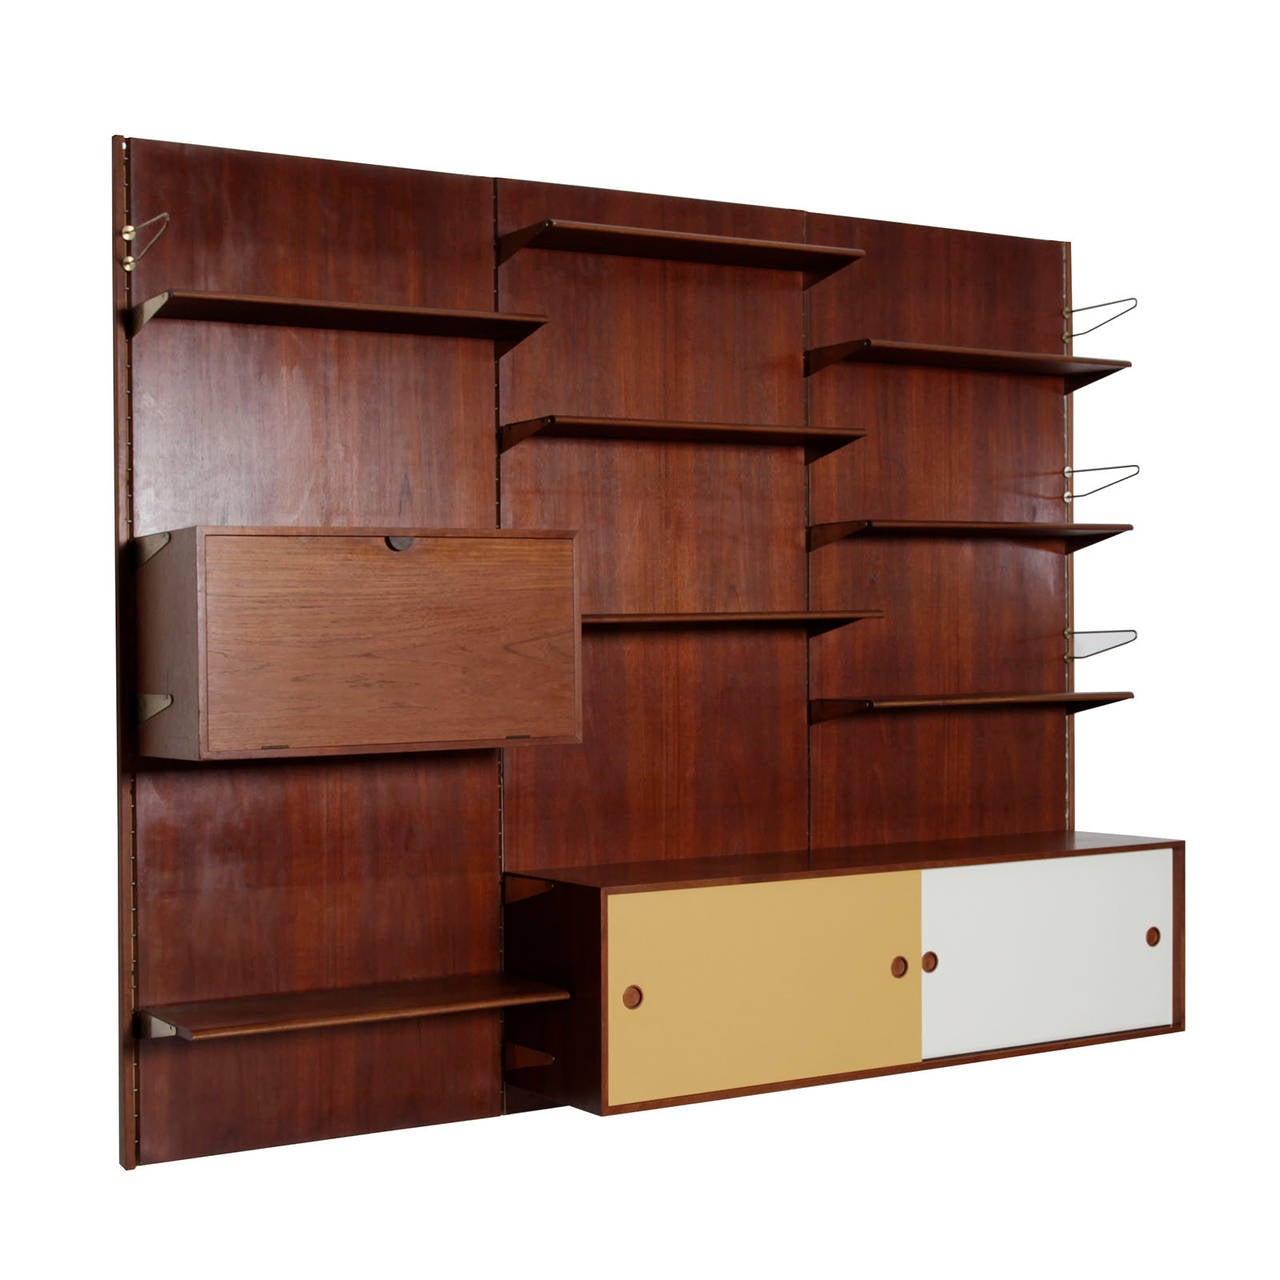 A wall-mounted shelving system consisting of three teak panels with eight shelves, one cabinet with painted sliding doors, one bar cabinet and one chest of drawers, shelves and cabinets can be easily moved to any configuration. Designed by Finn Juhl